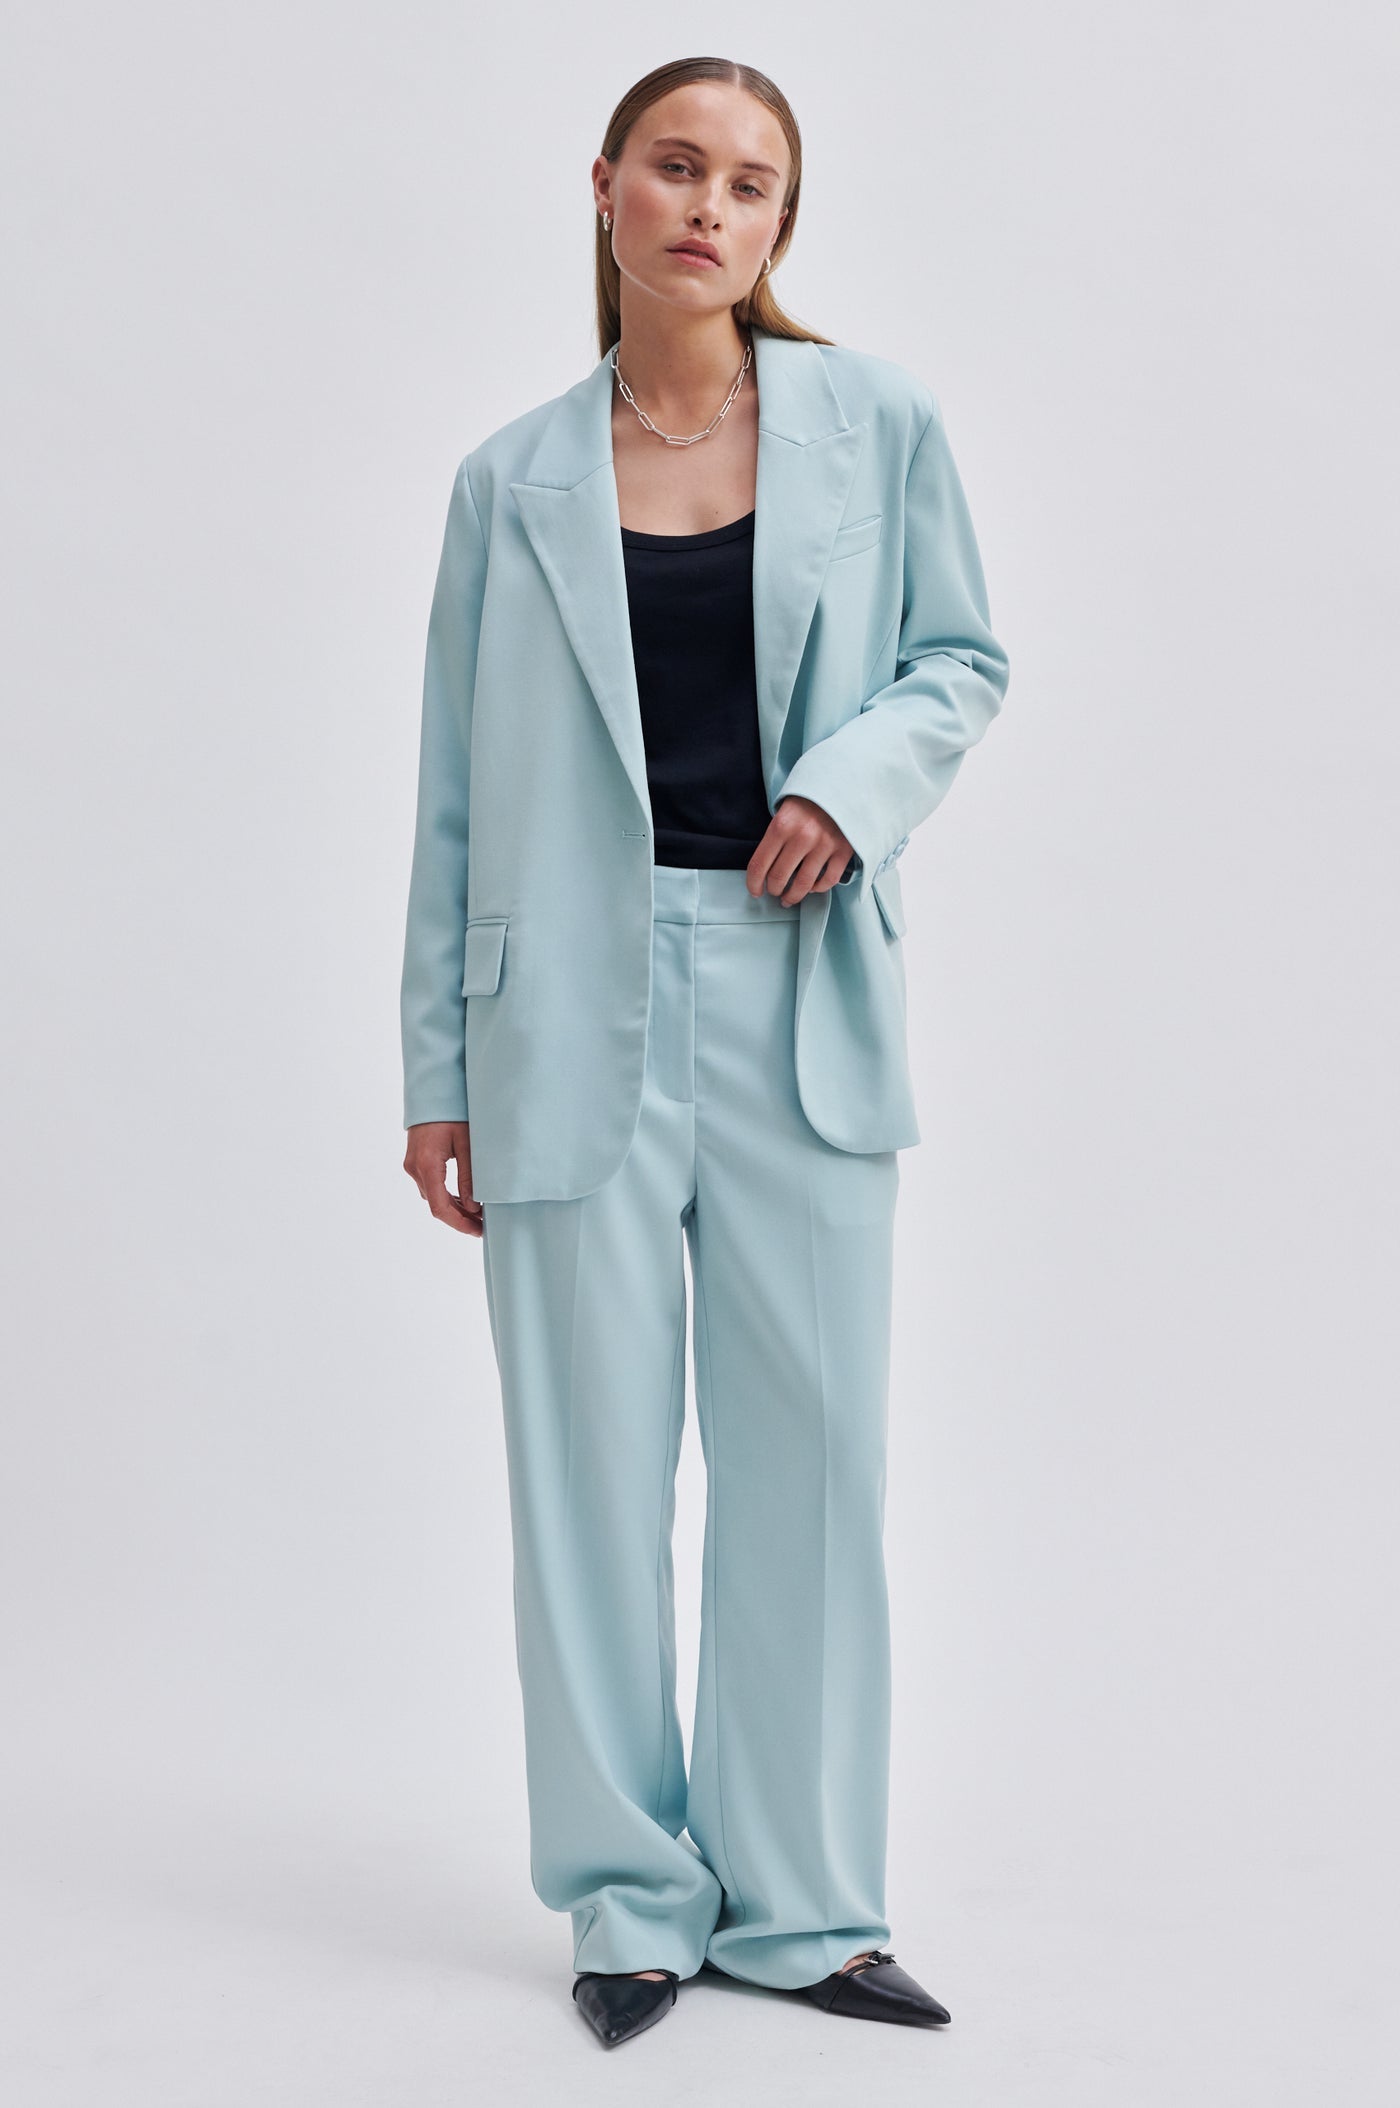 13 of the Best Summer Trouser Suits for Women | Who What Wear